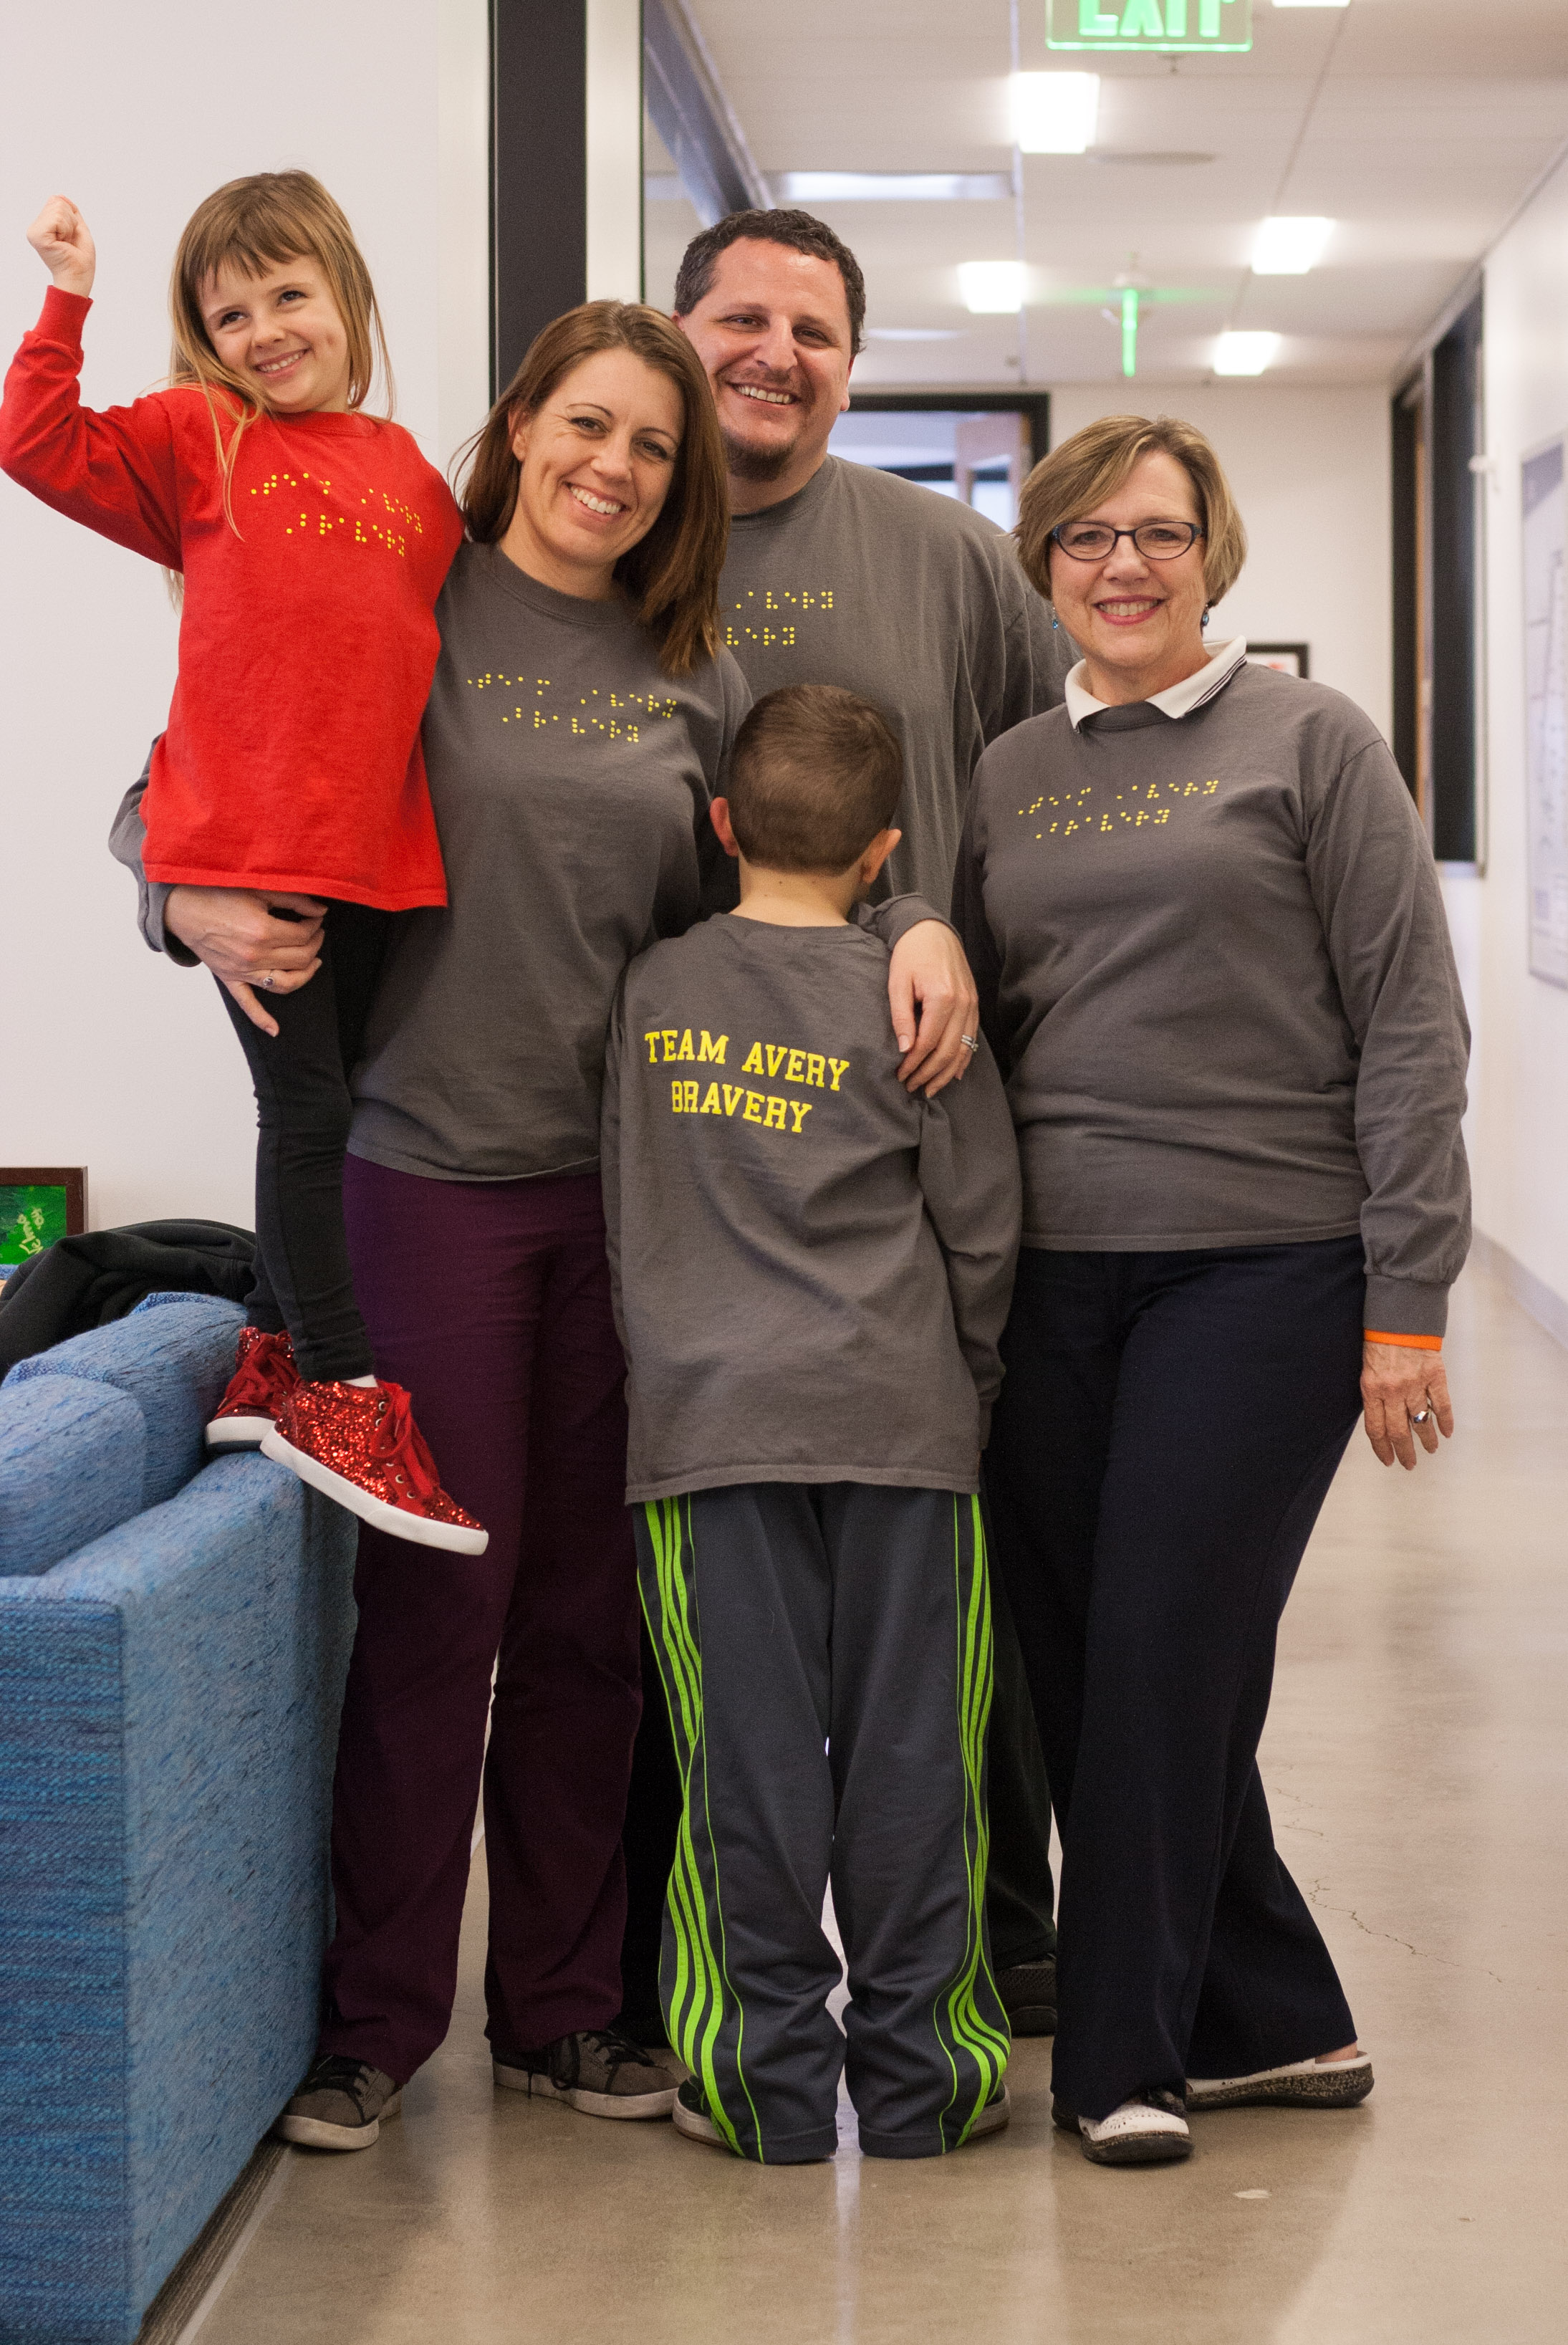 Competitor Avery poses with her smiling family, who made shirts that say "Team Avery Bravery" in braille on the front and in text on the back.